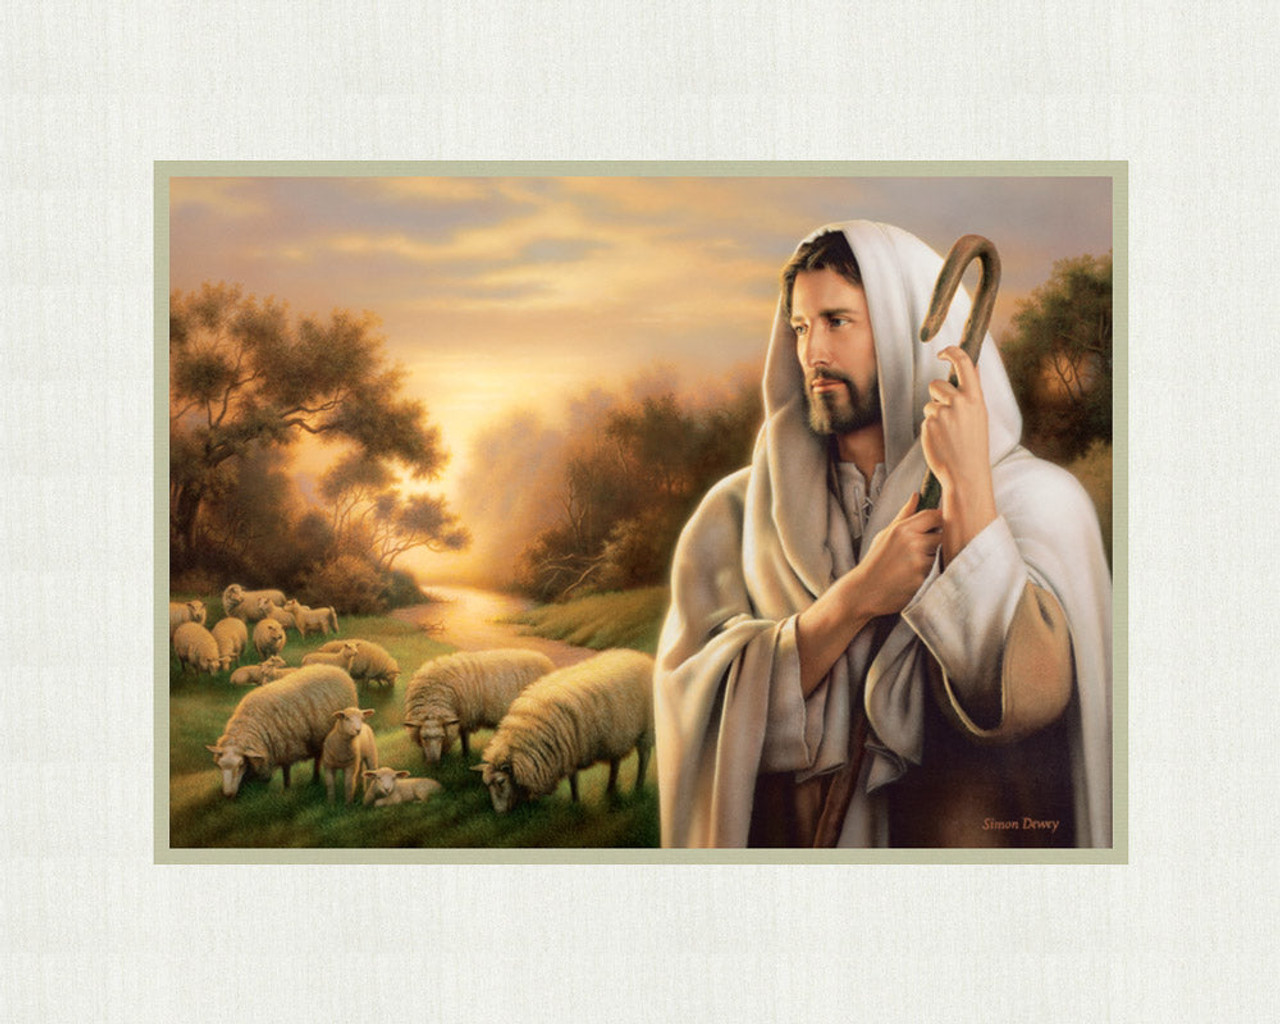 The Lord is my Shepherd by Simon Dewey (5x7 print matted to 8x10)